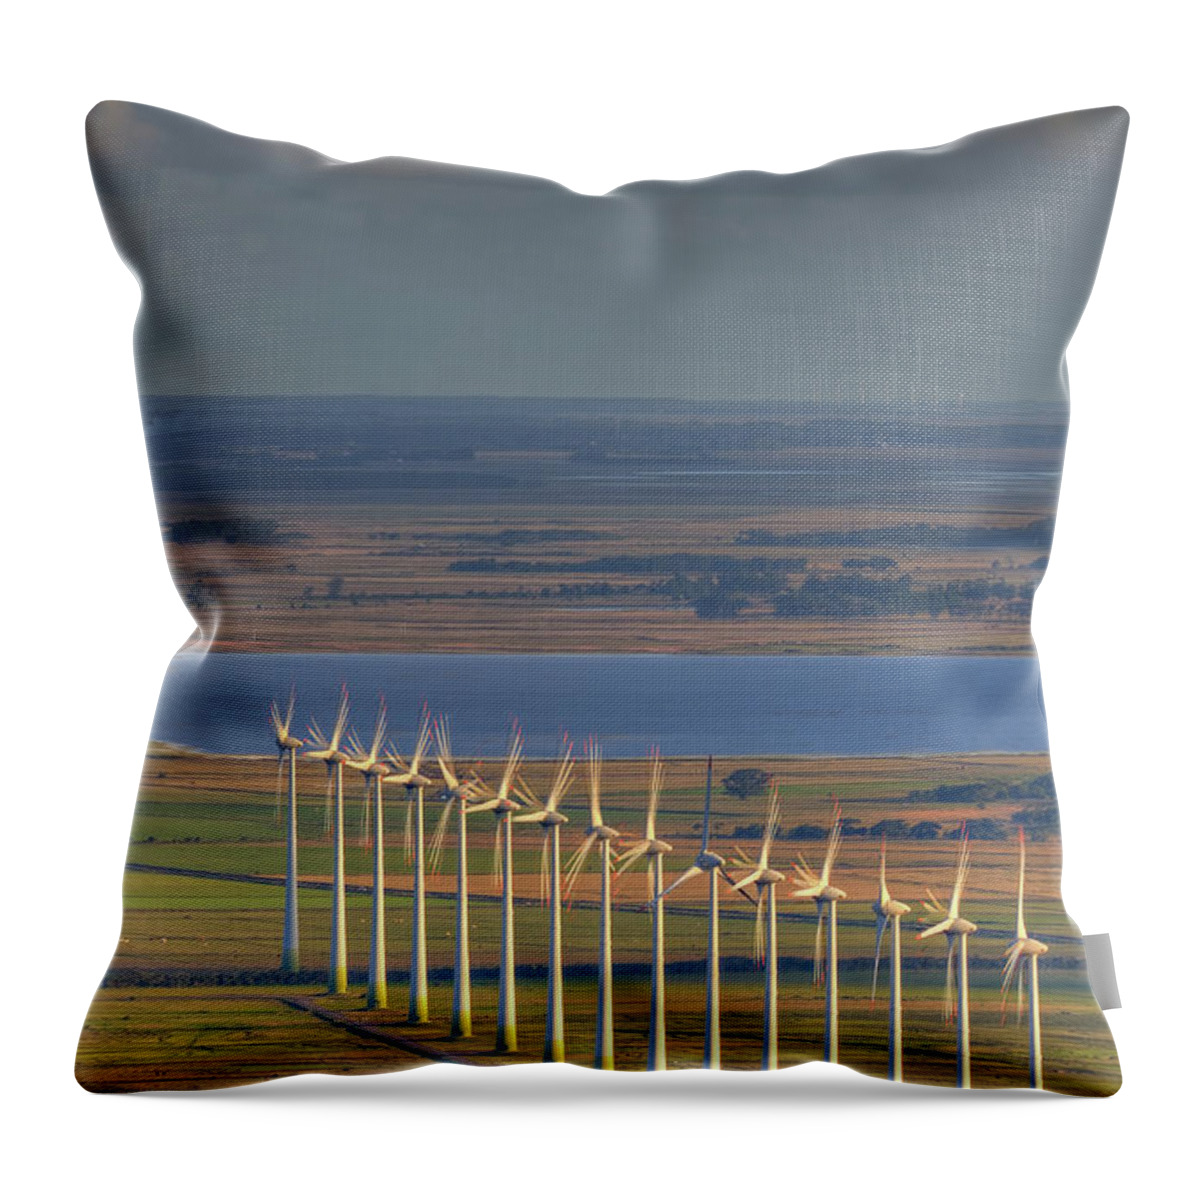 Environmental Conservation Throw Pillow featuring the photograph Wind Energy by By Roberto Peradotto